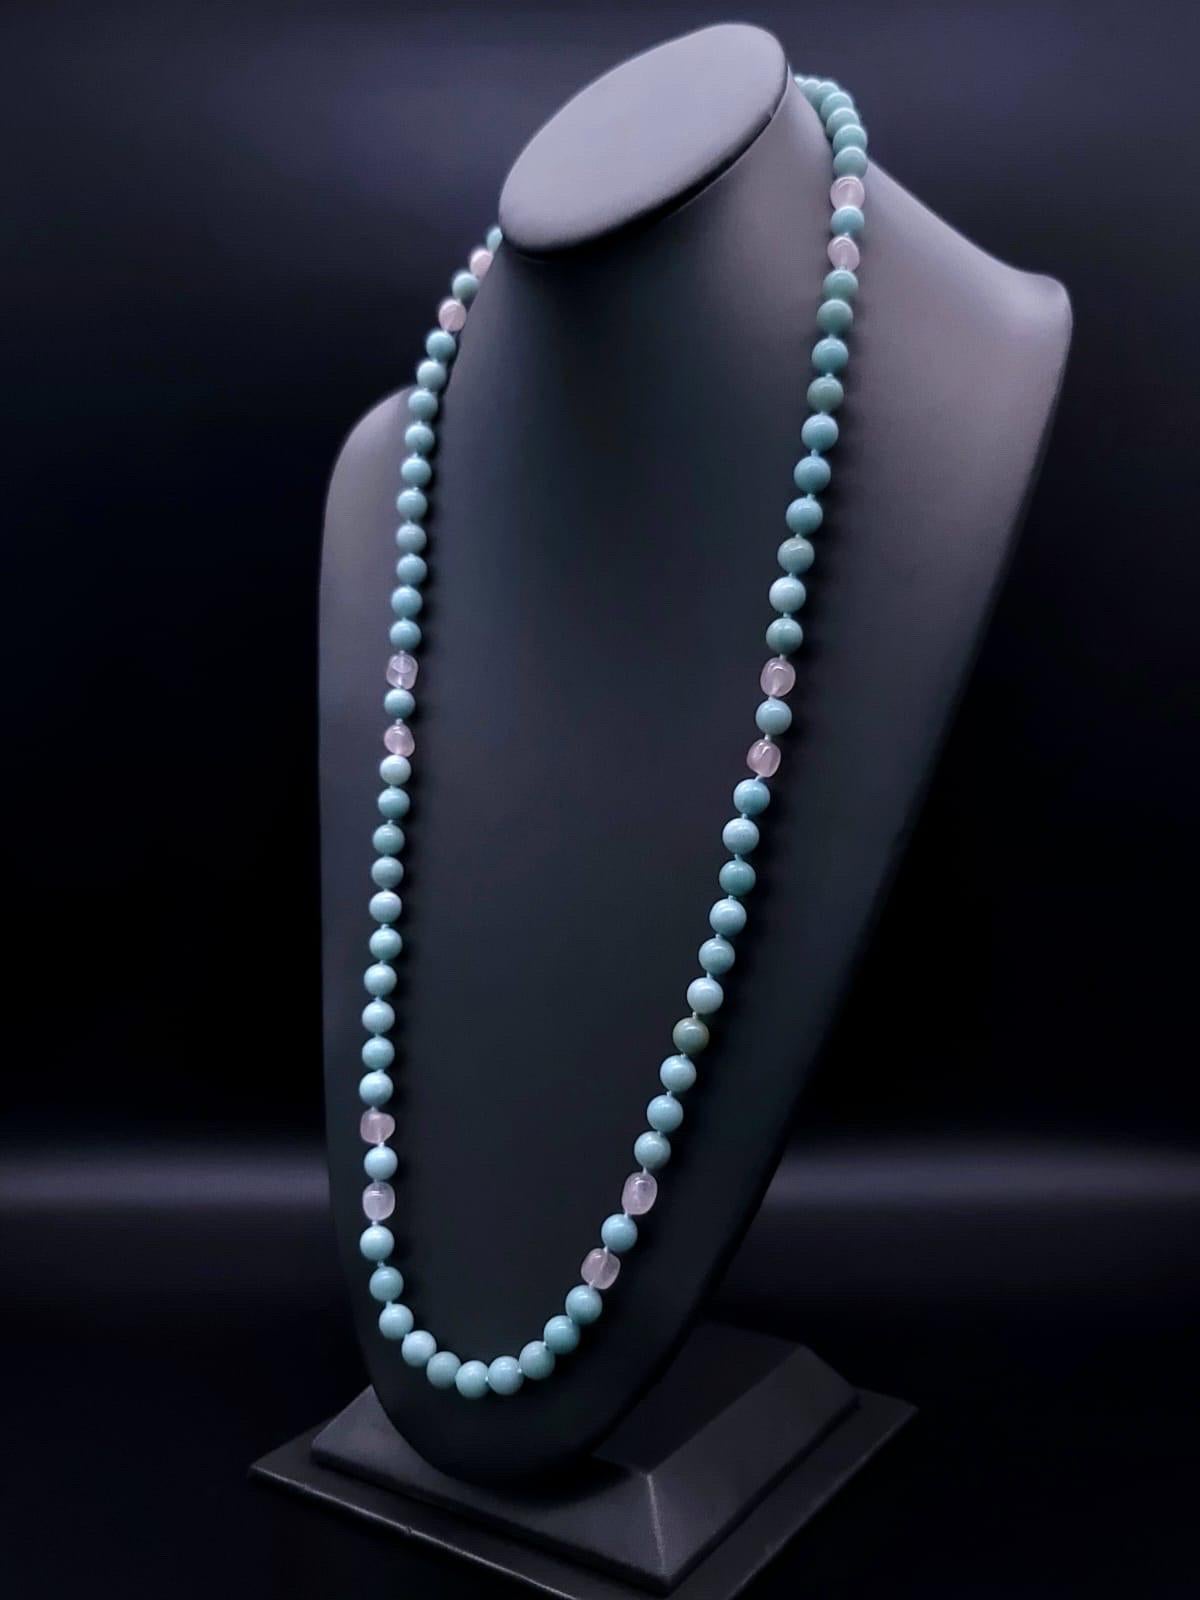 One-of-a-Kind

Pastel 8m.m Amazonite and Rose Quartz in a long (48”)strand with polished Rose Quartz cabochon clasp offers maximum versatility. Wear the strand as one long dramatic necklace or double up into a conventional two-strand necklace. Or go